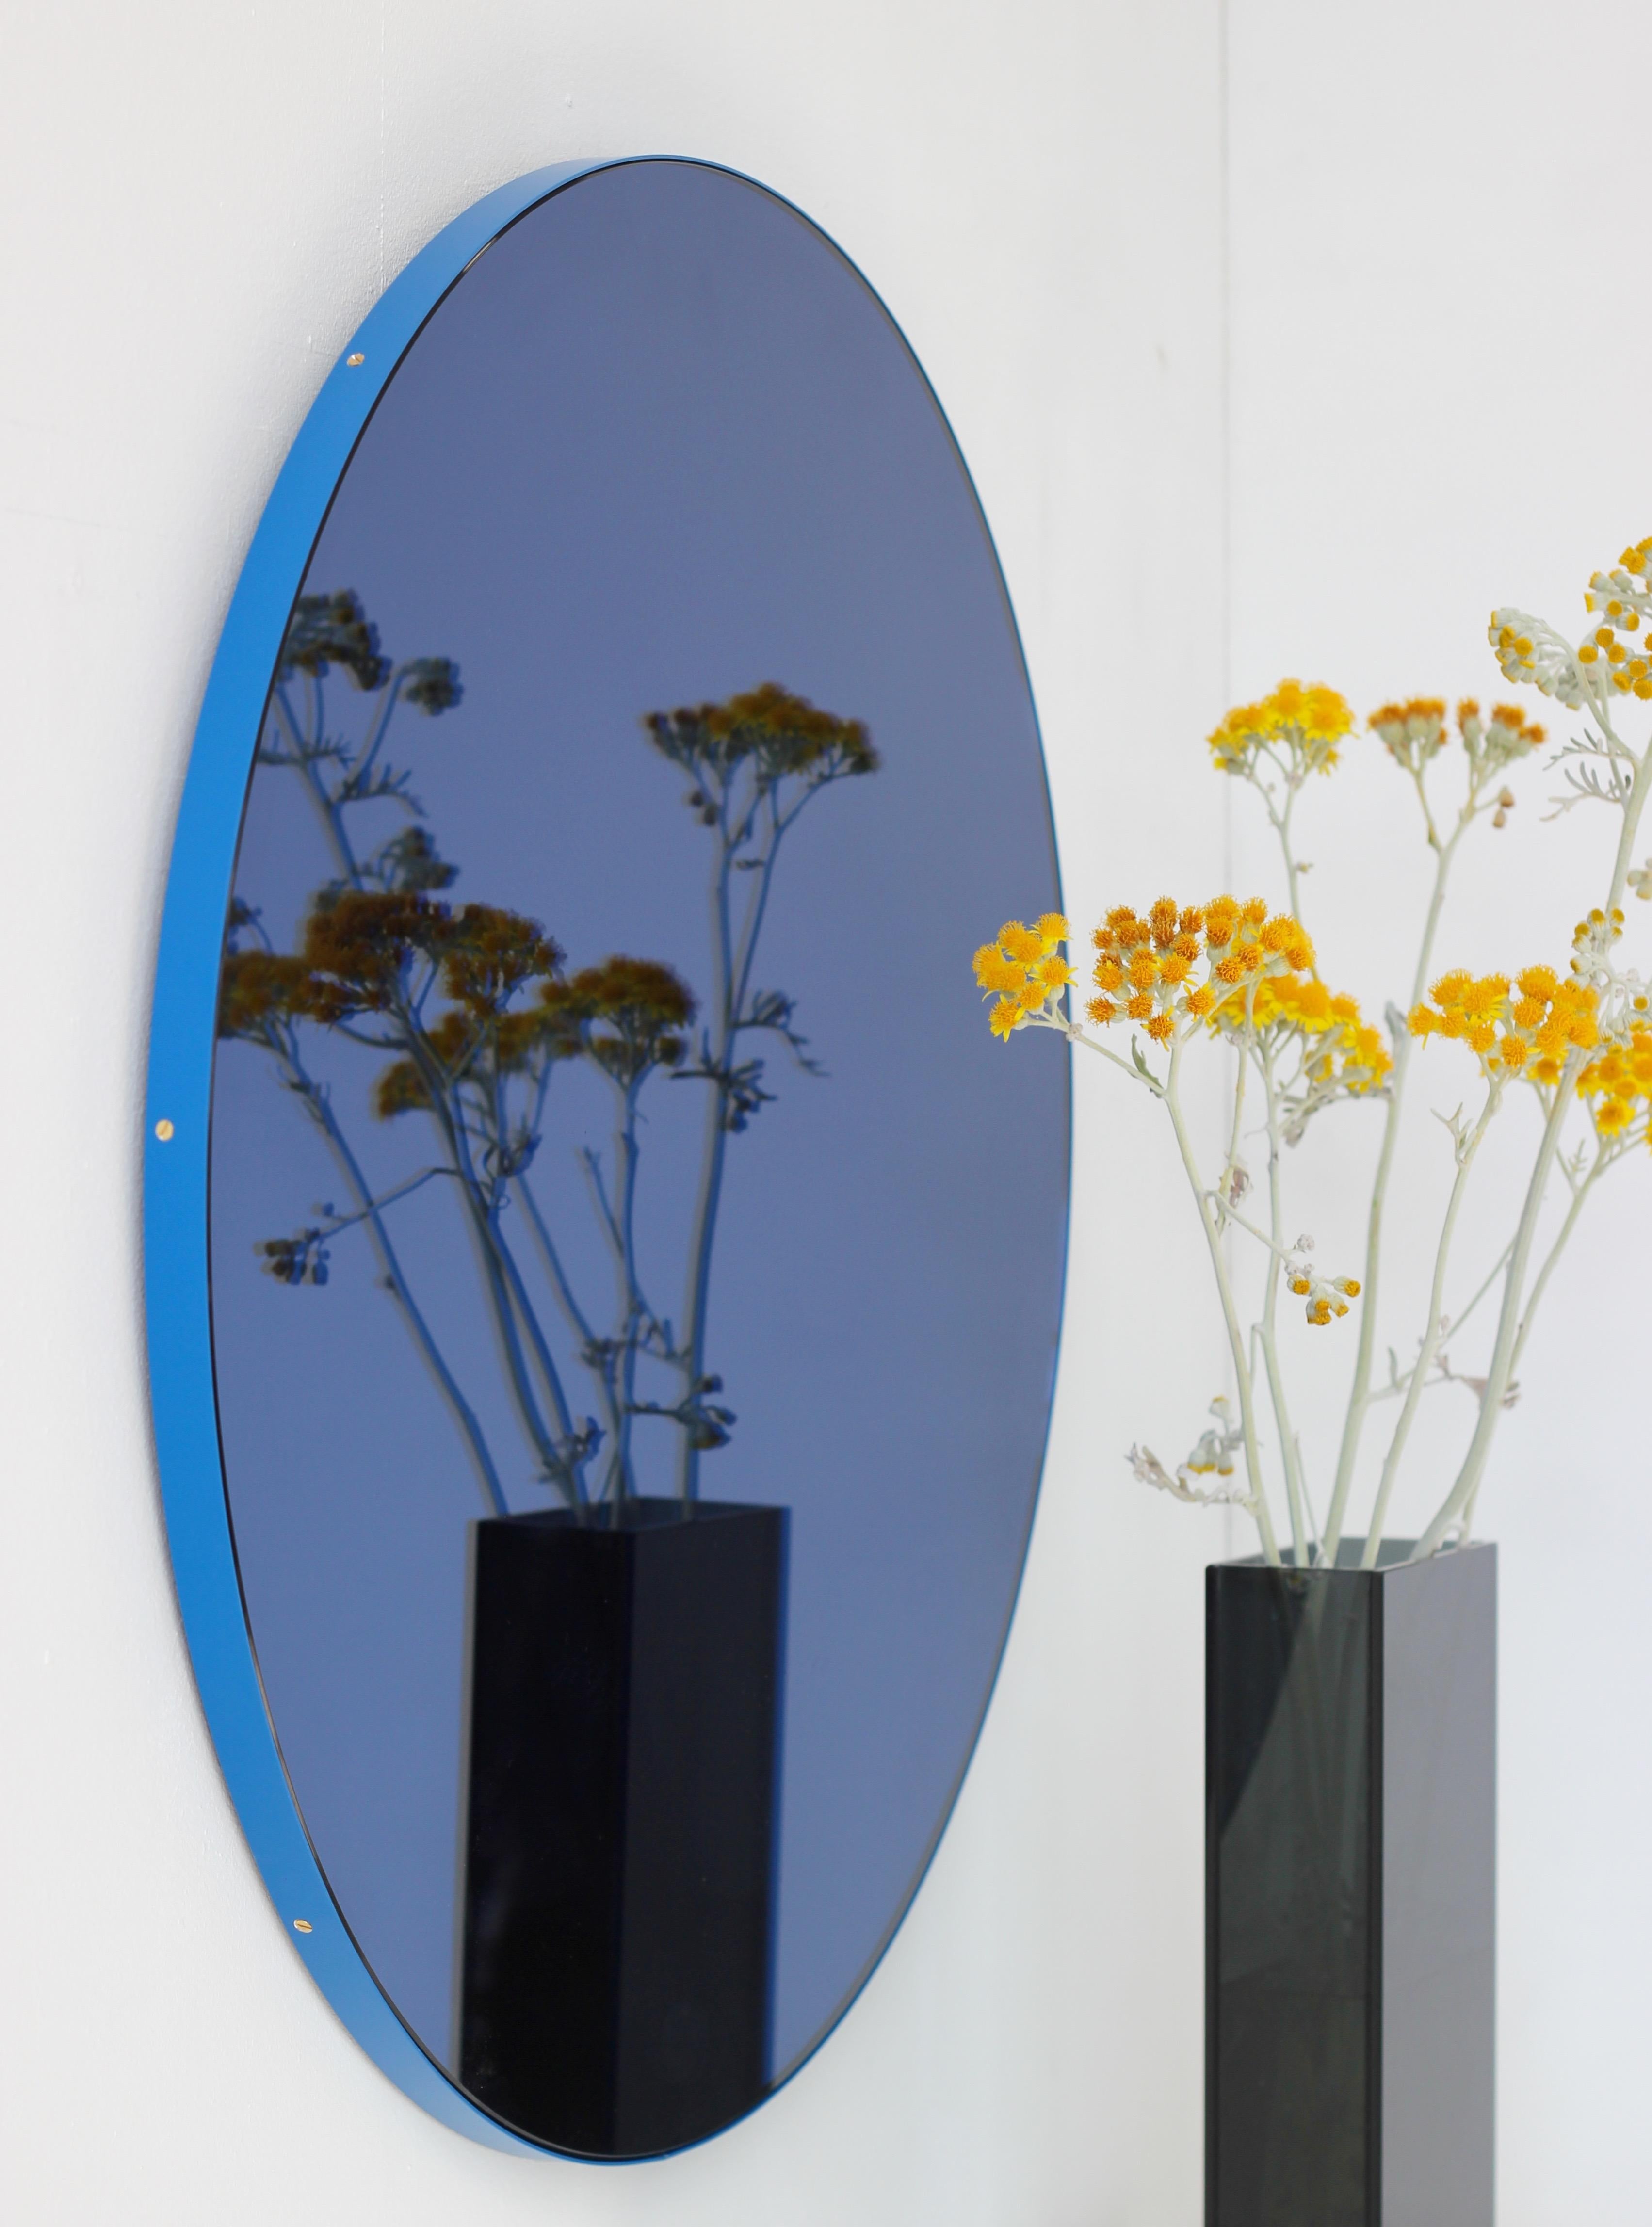 British Orbis Blue Tinted Circular Mirror with a Contemporary Blue Frame, Bespoke, XL For Sale